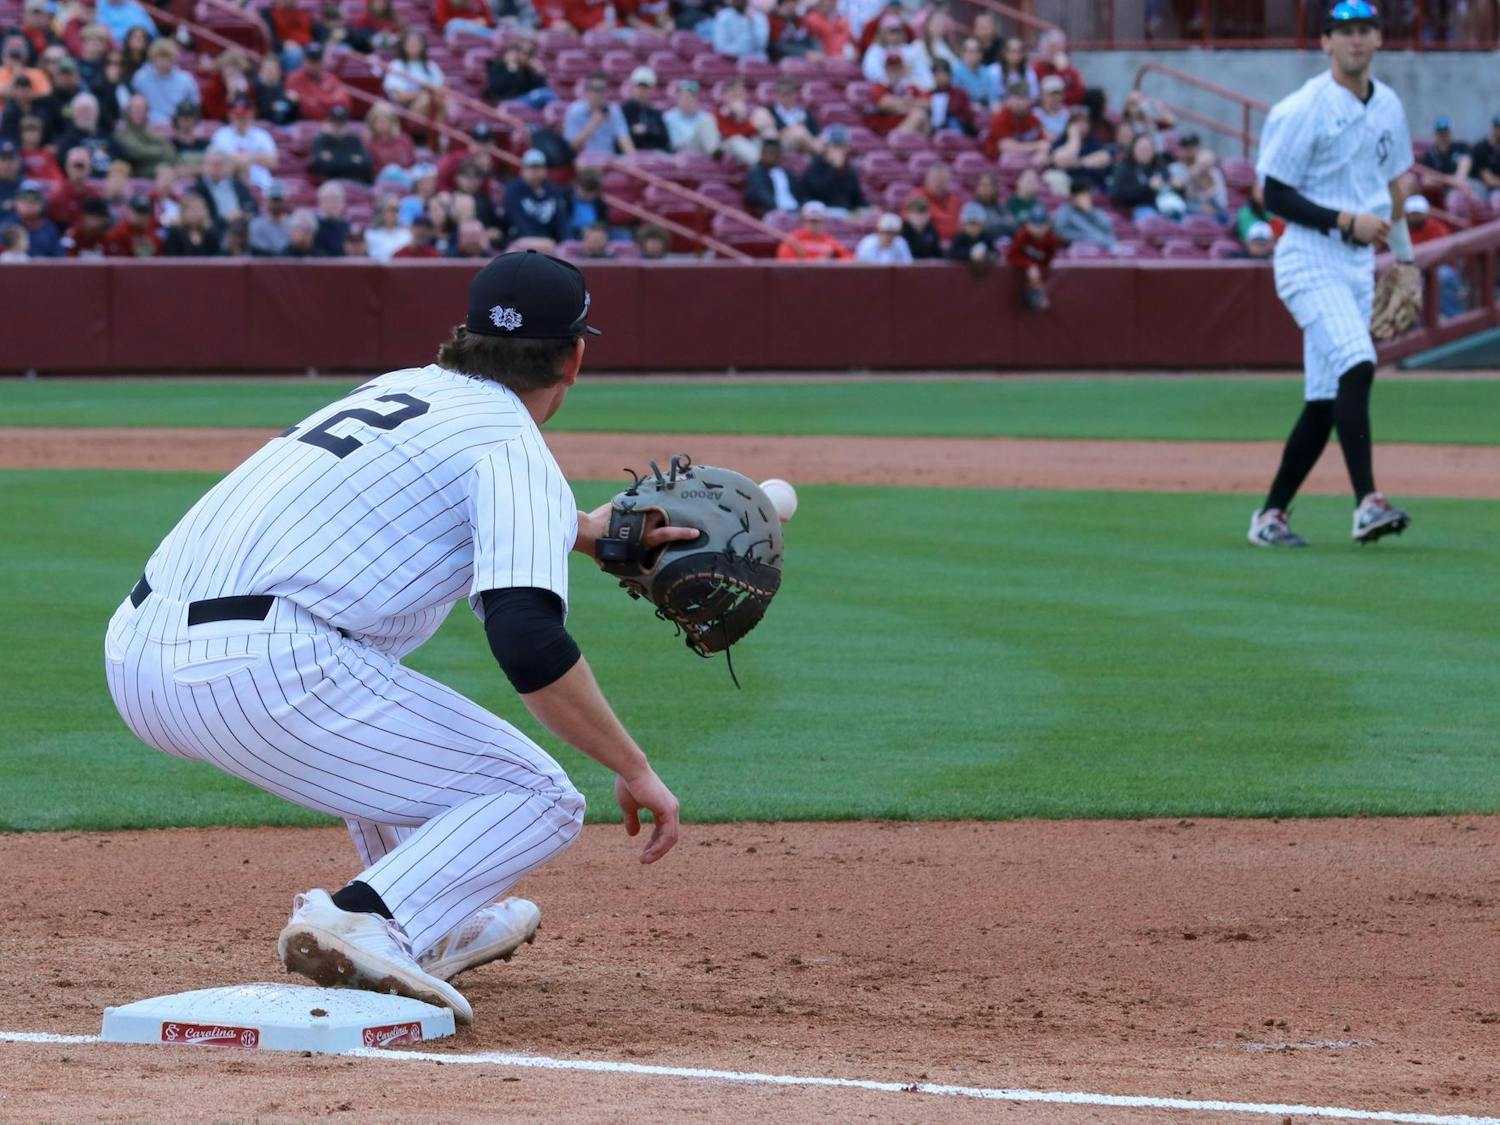 Senior infielder Tyler Causey catches an out on first base as South Carolina defeats Vanderbilt at Founders Park on March 23, 2024. Causey had eight put-outs during the Gamecocks' 8-3 victory.